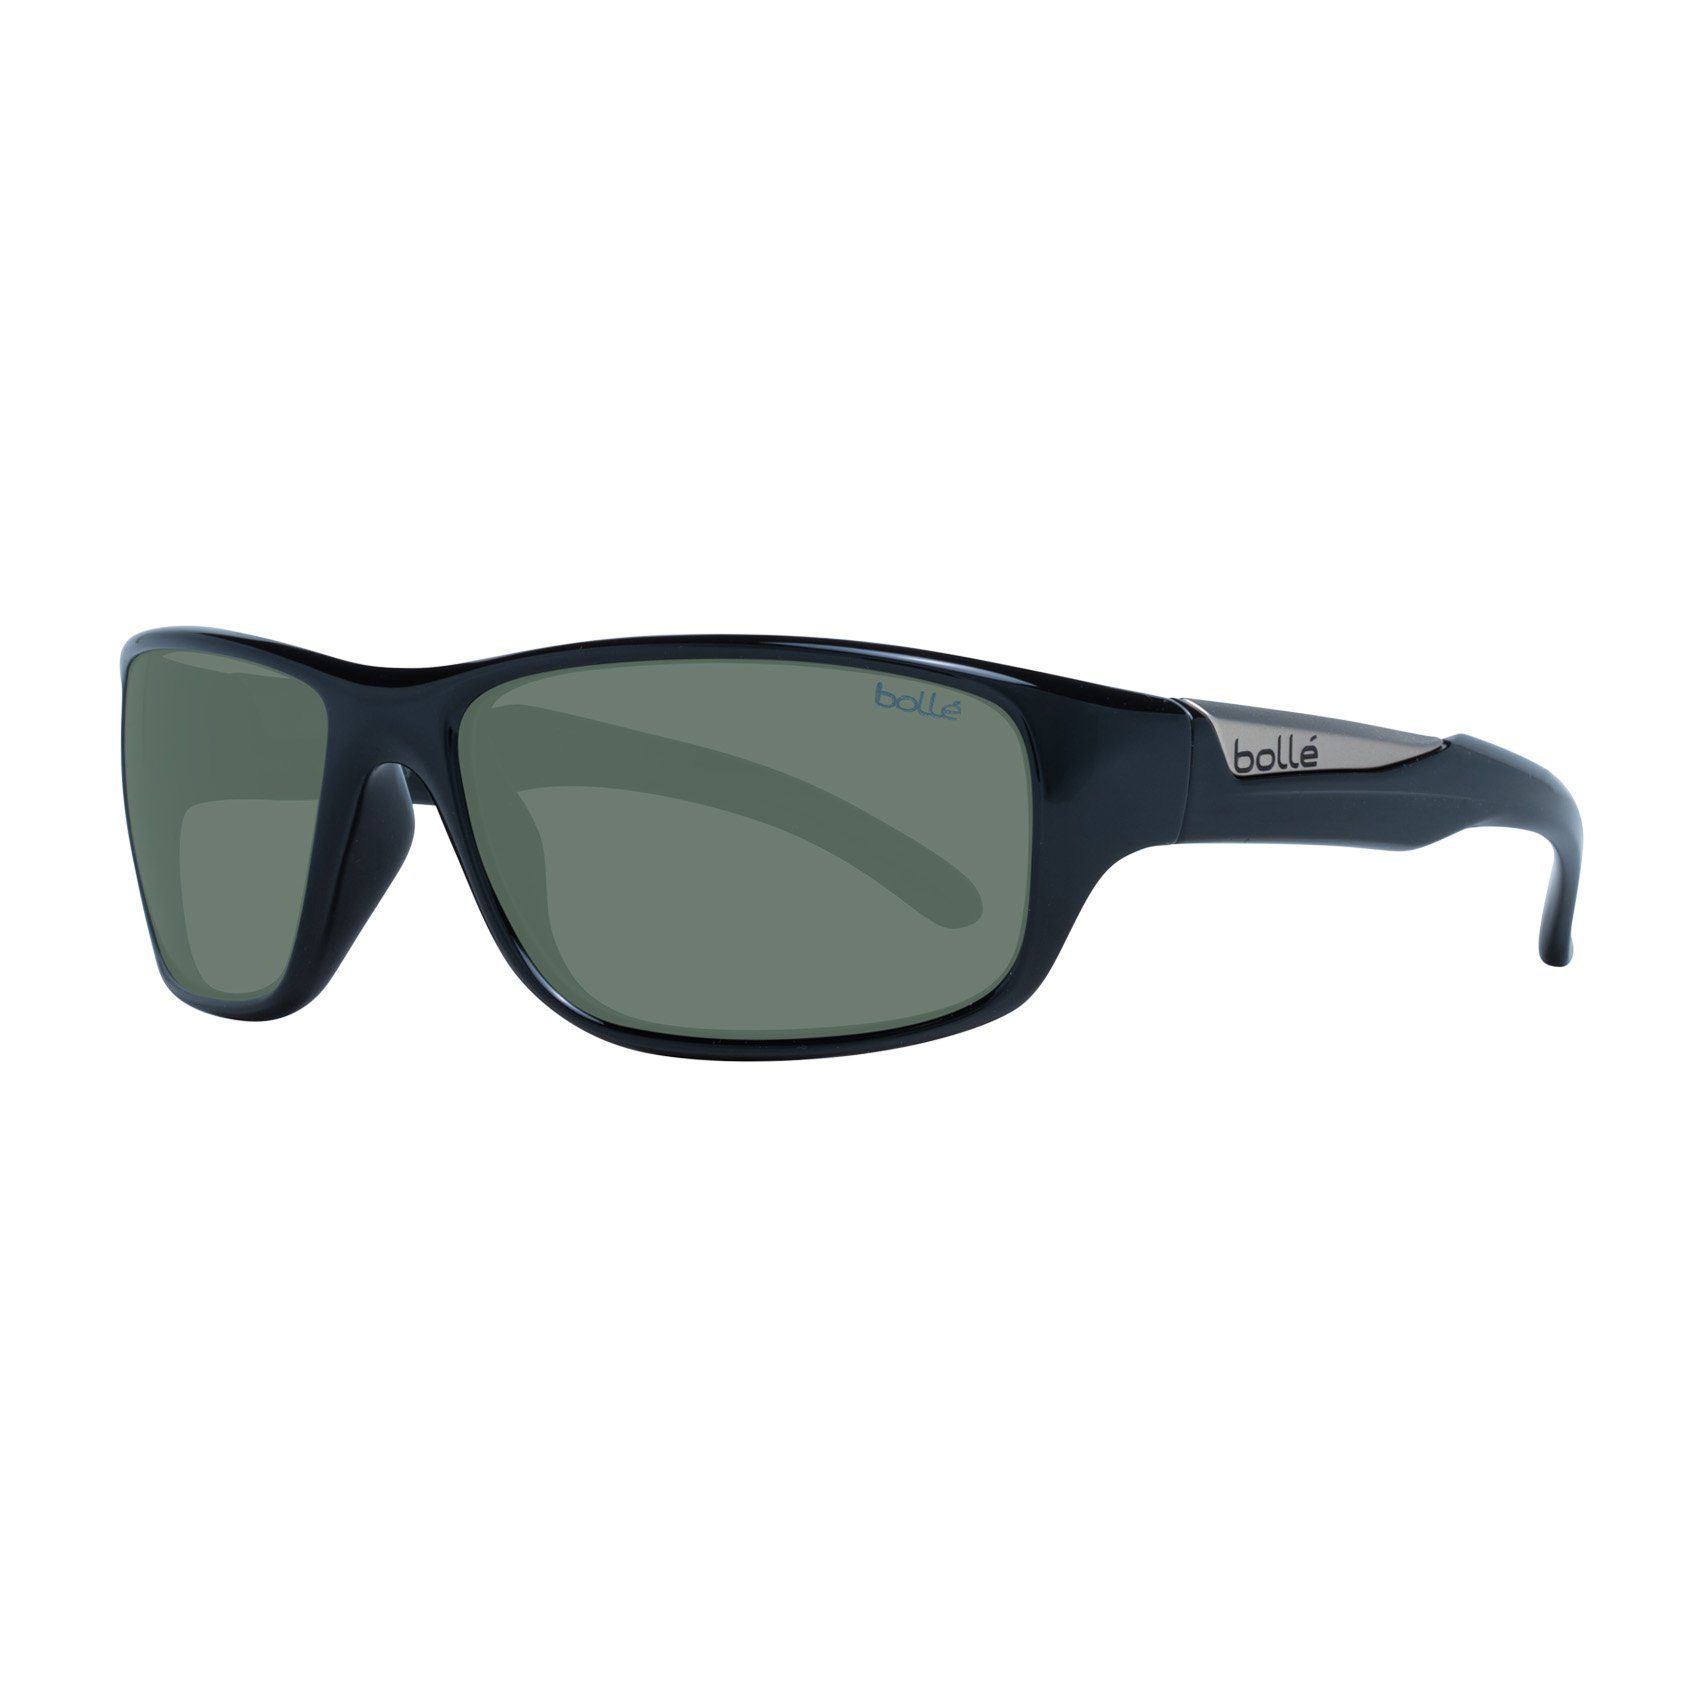 Bolle Sonnenbrille Vibe 59 Italy in Made Black 11651 Shiny